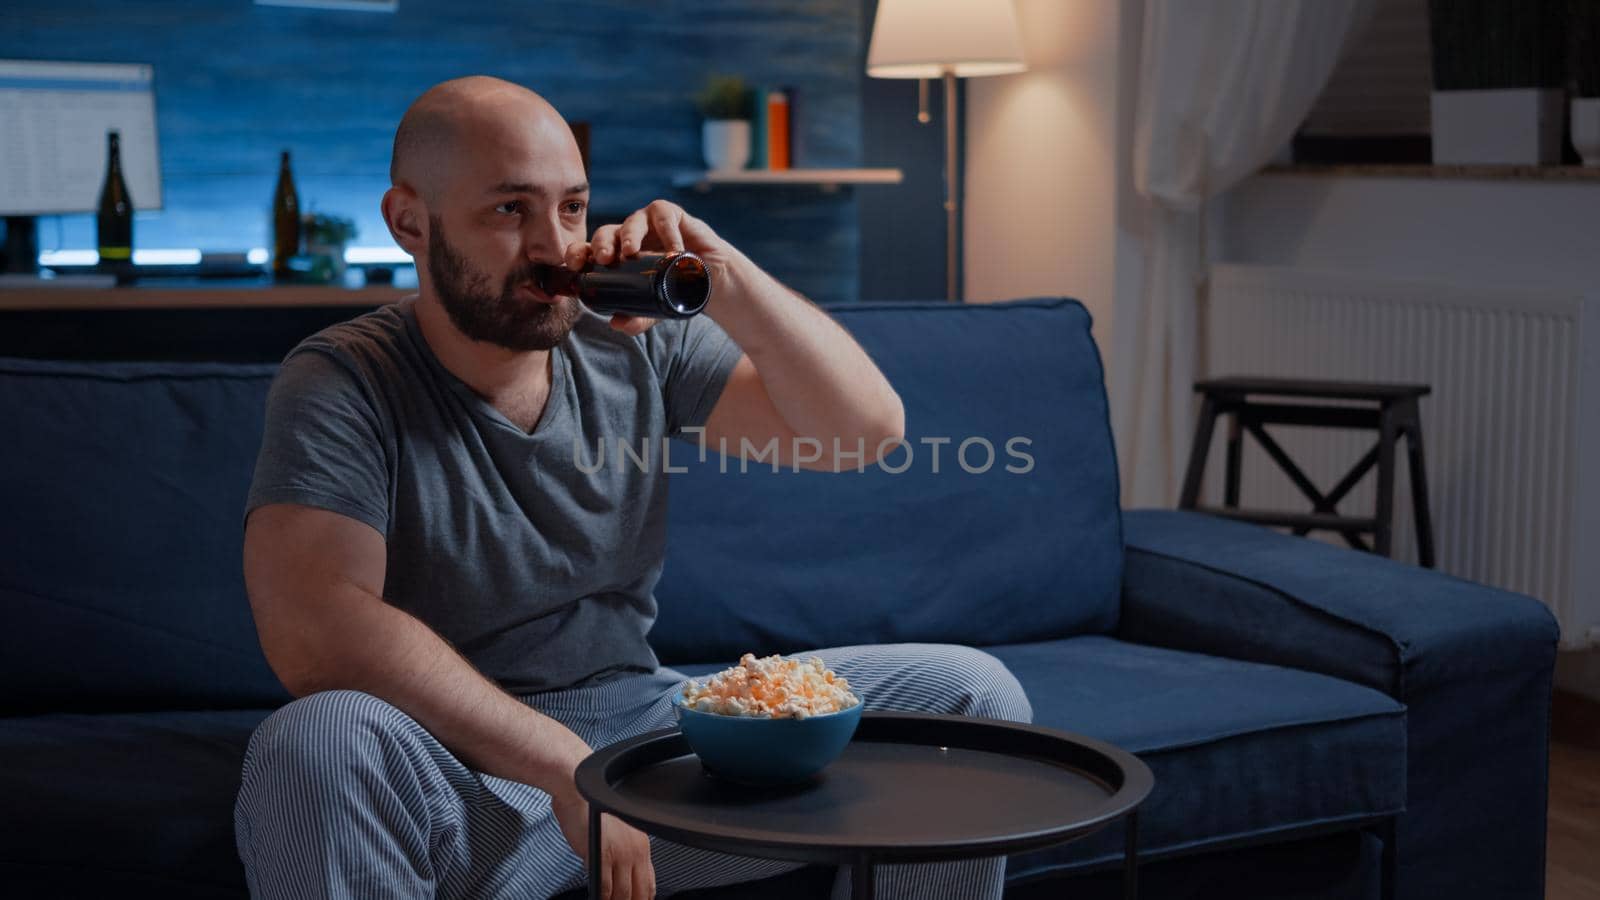 Upset pro gamer sitting in front of television losing soccer video games holding wireless controller, joystick. Frustrated man for gaming over drressing in pajama relaxing playing online competition